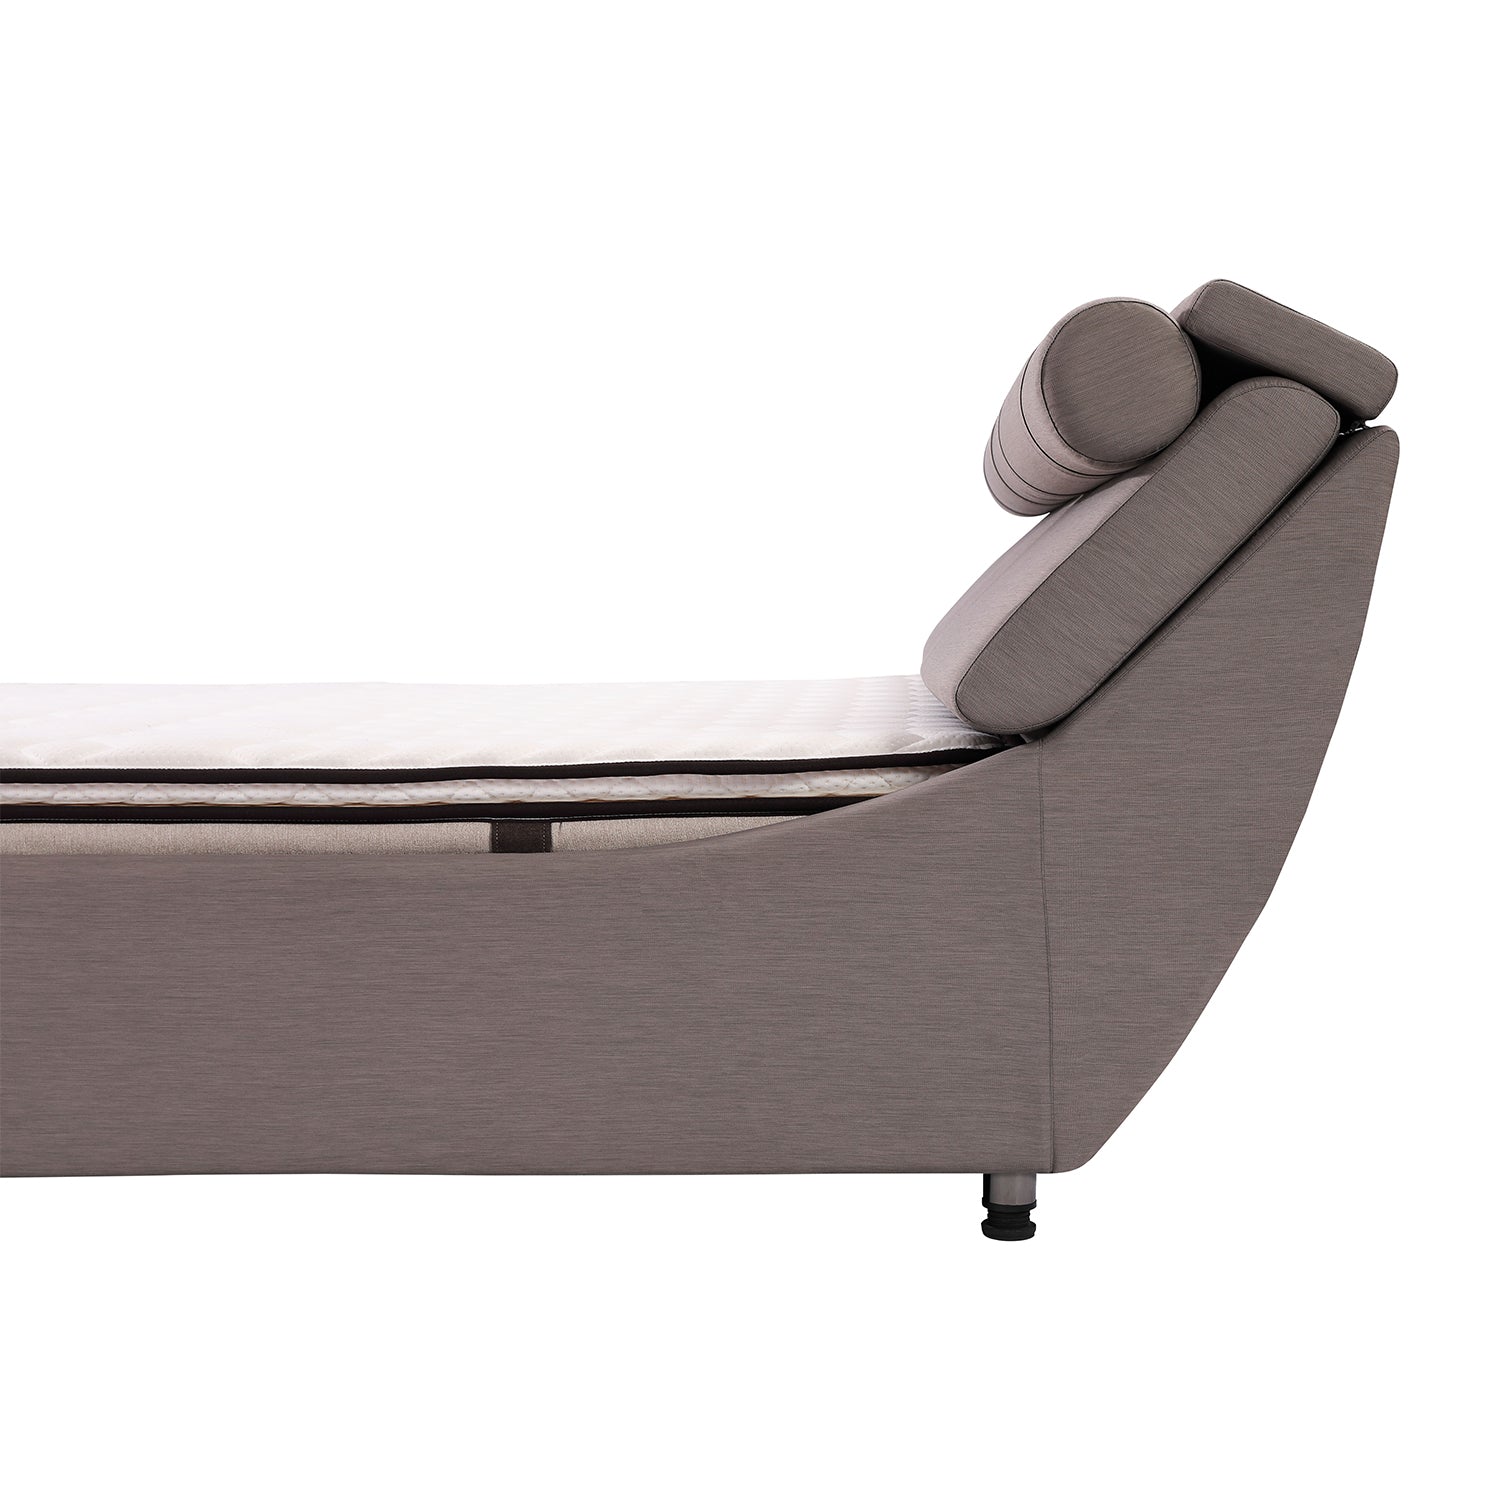 Side view of DeRUCCI Bed Frame BZZ4 - 093C with sleek, fabric design inspired by streamlined sailboats.